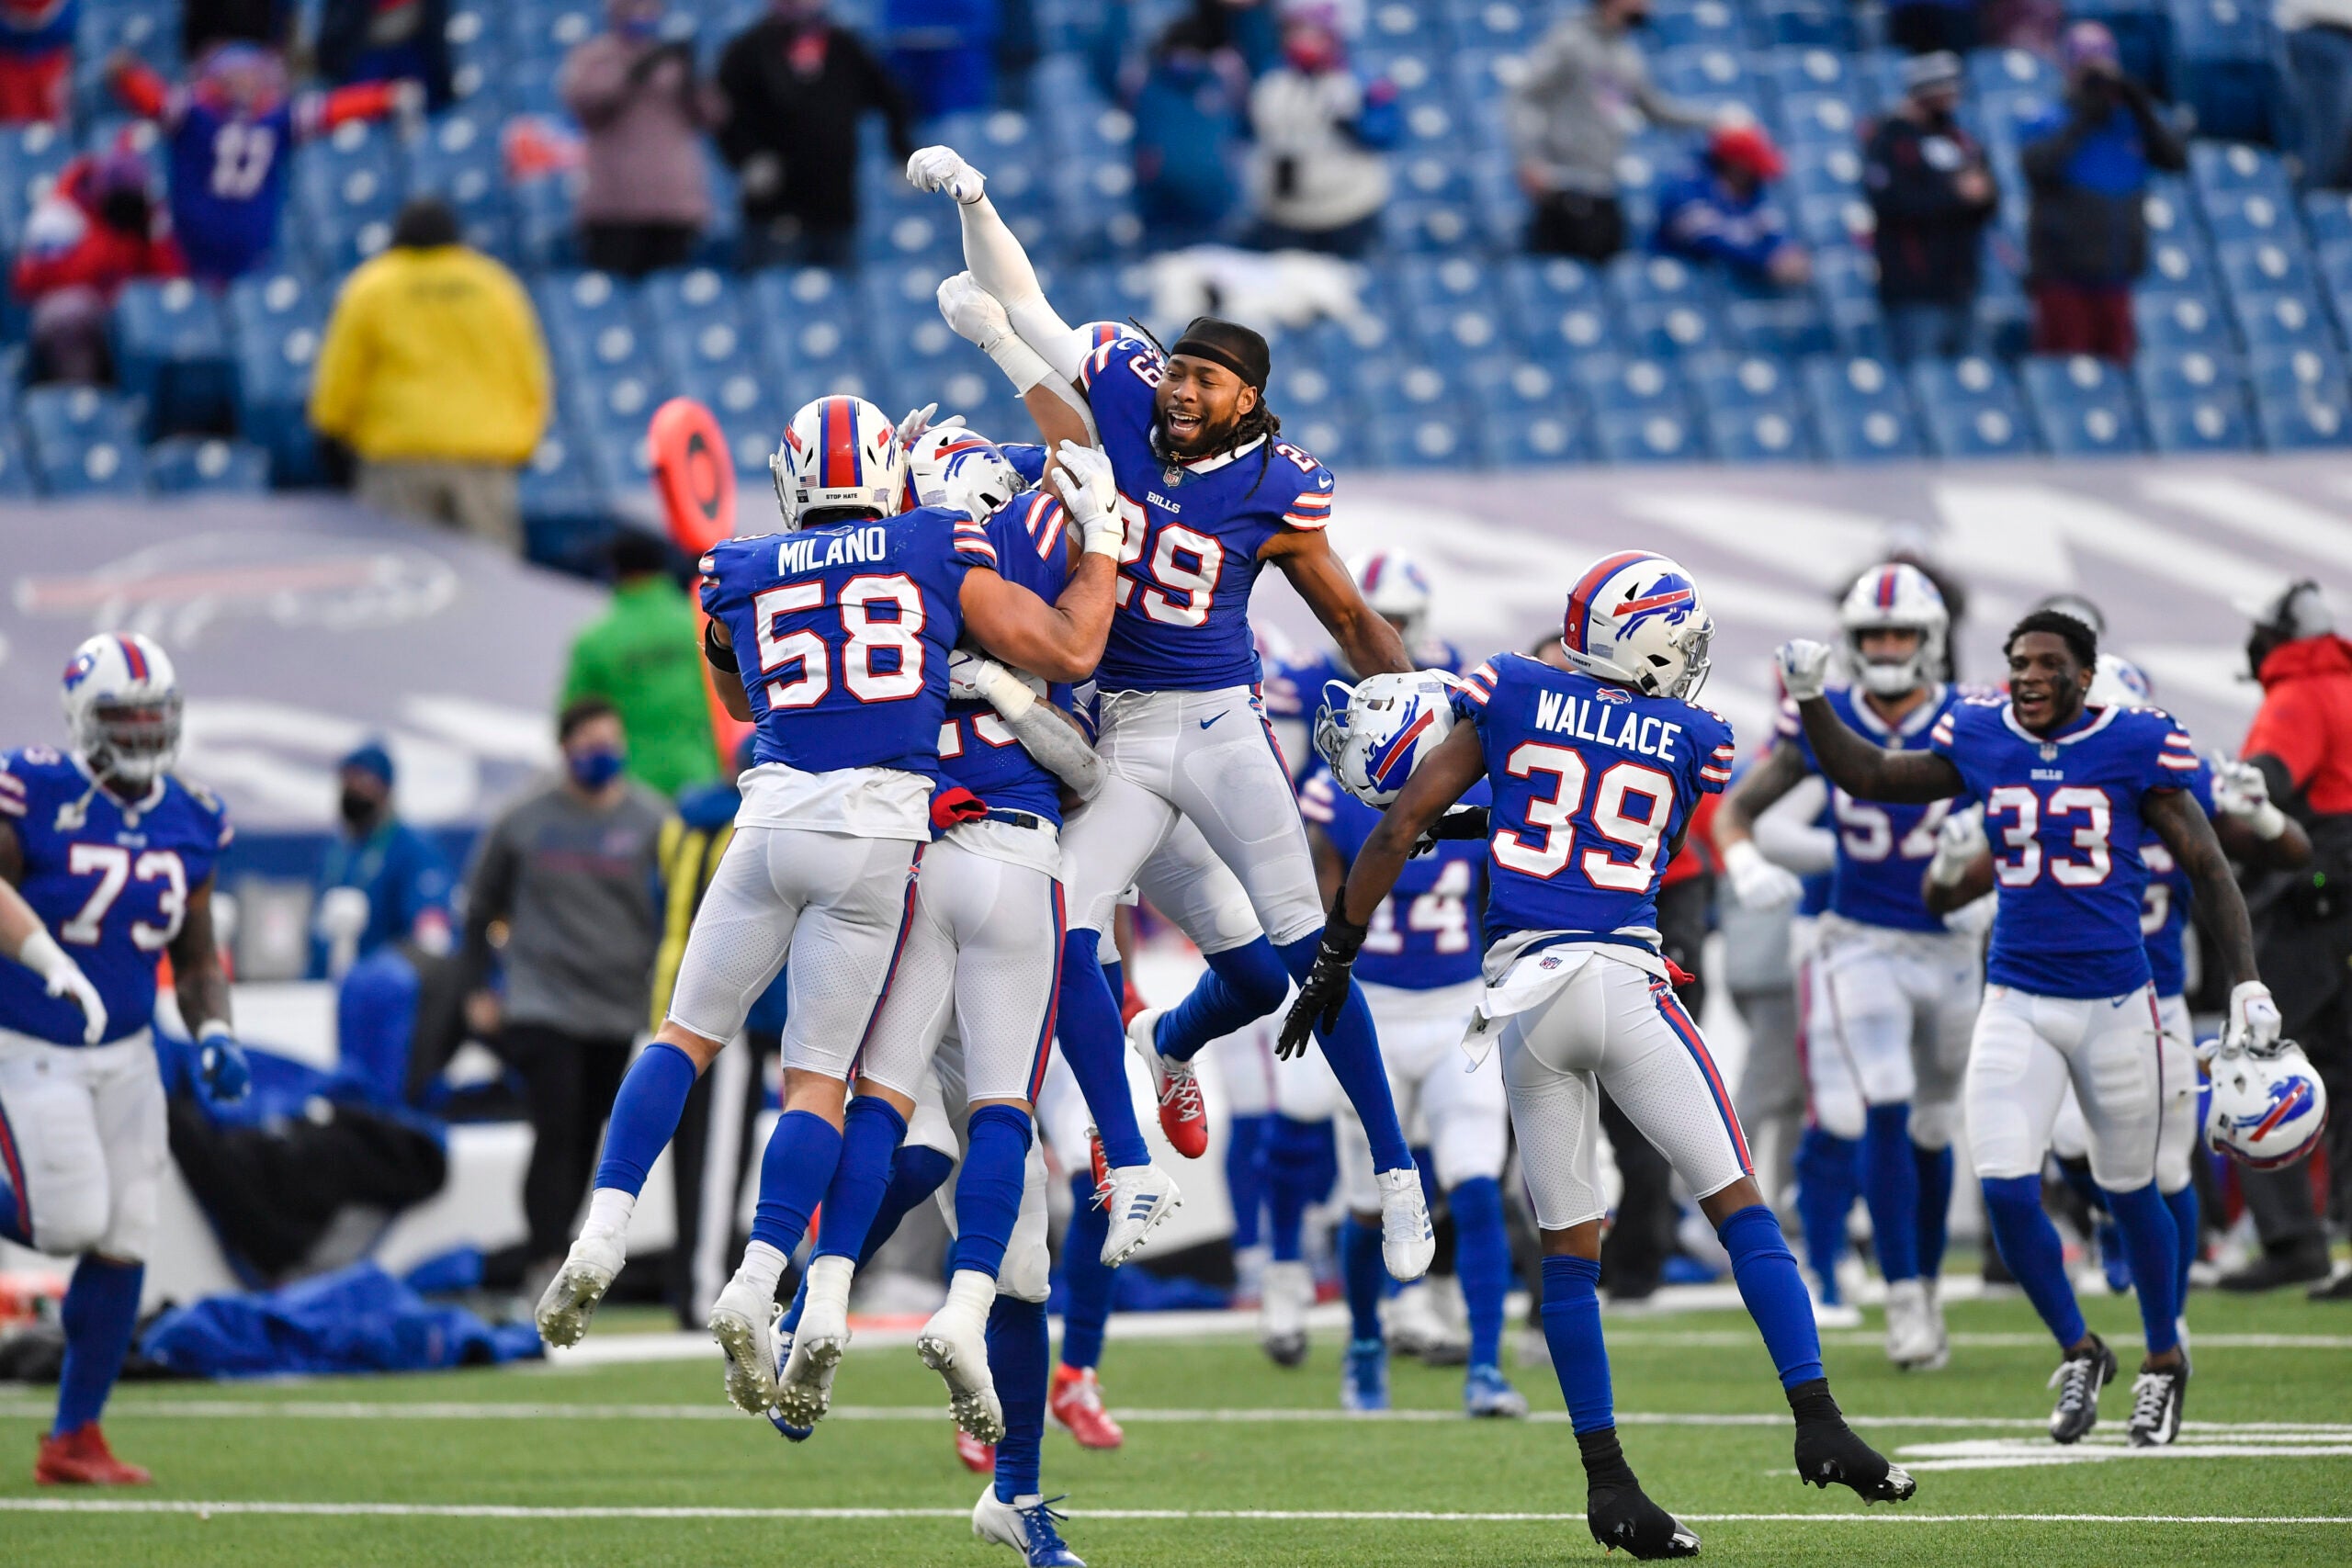 Bills beat Colts 27-24 for first playoff win since 1995